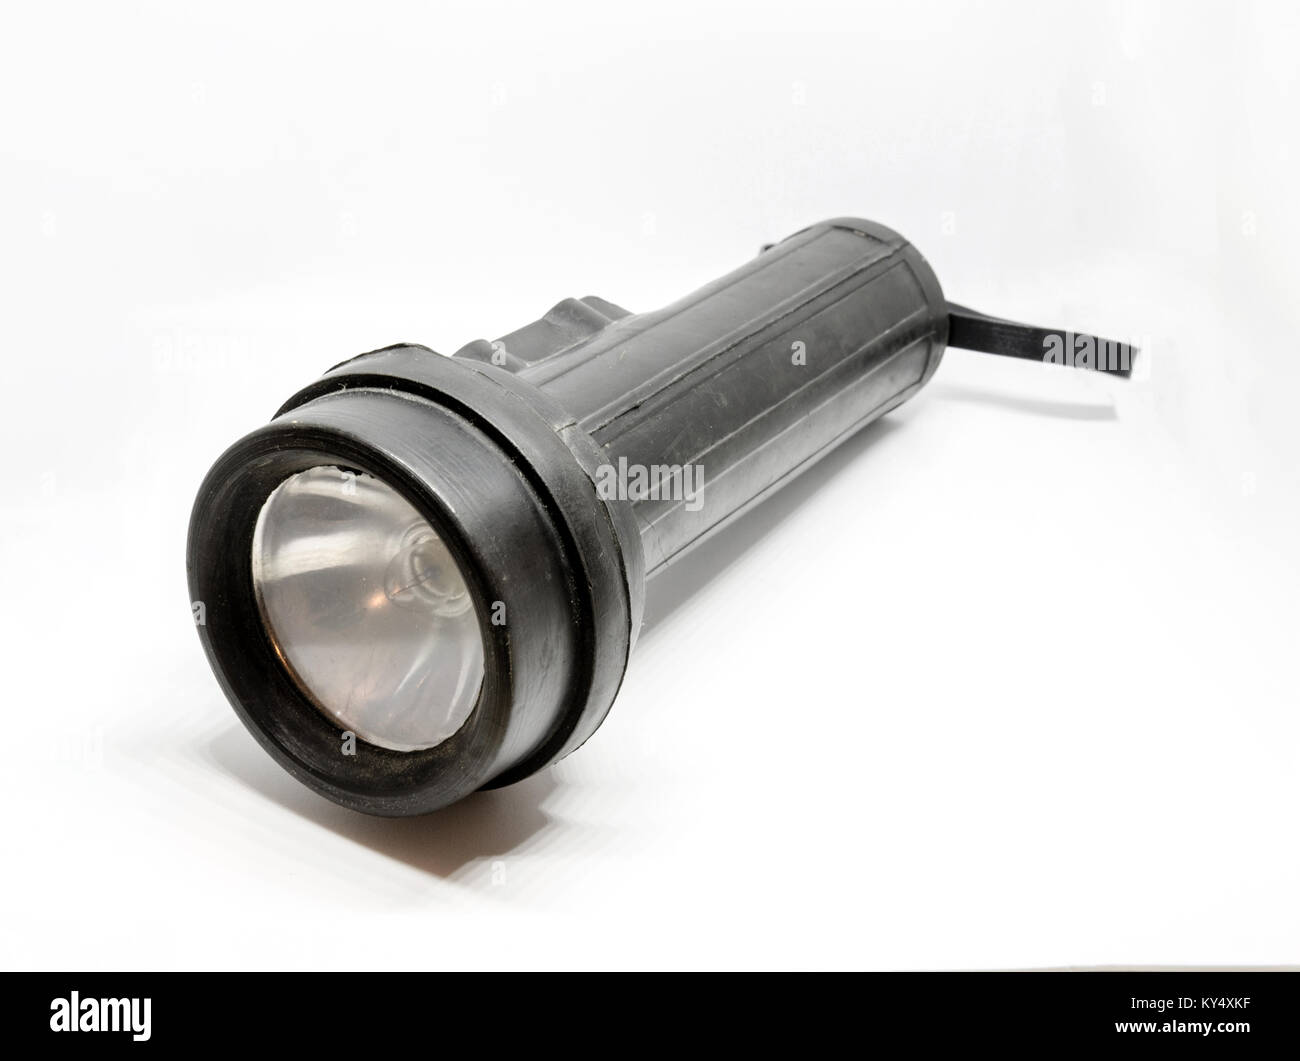 https://c8.alamy.com/comp/KY4XKF/a-black-rubber-torch-or-flashlight-isolated-on-a-white-background-KY4XKF.jpg